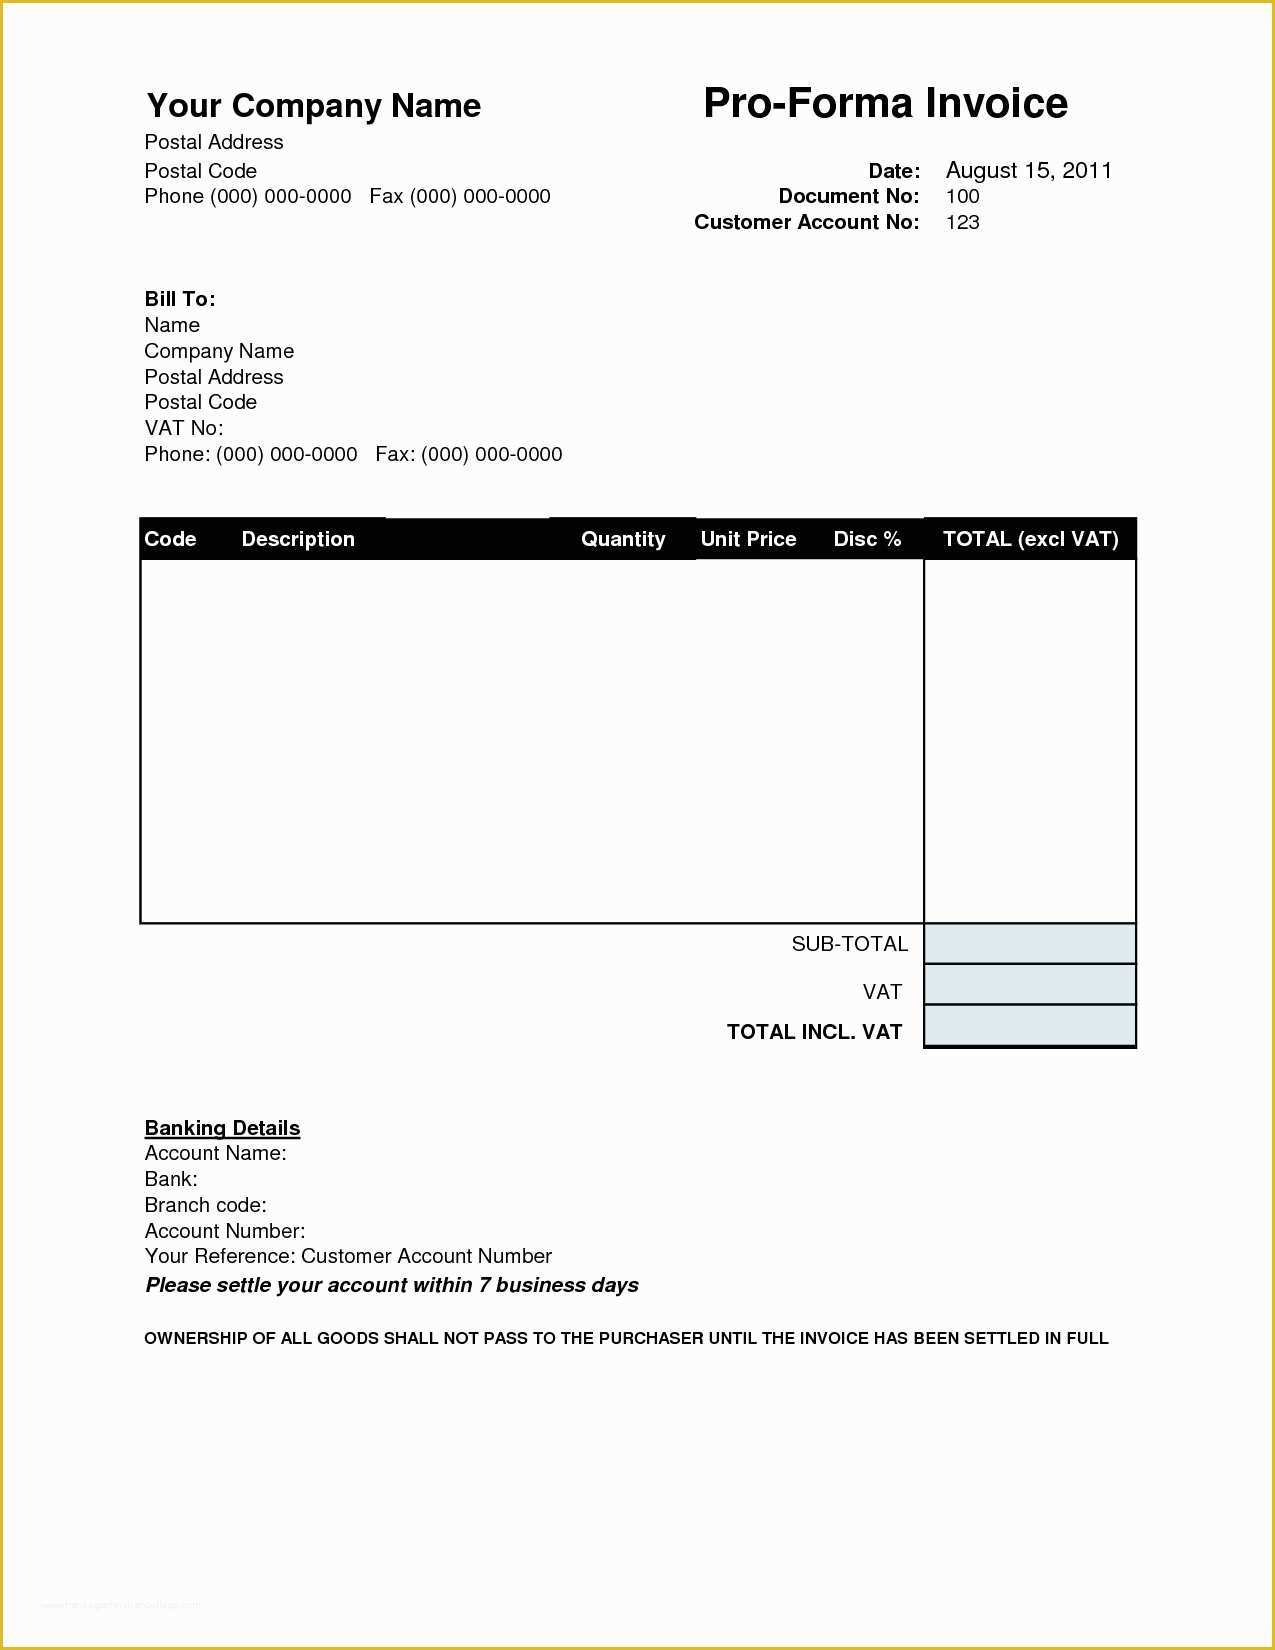 Free Proforma Invoice Template Download Of Proforma Invoice Template Download Free Invoice Template